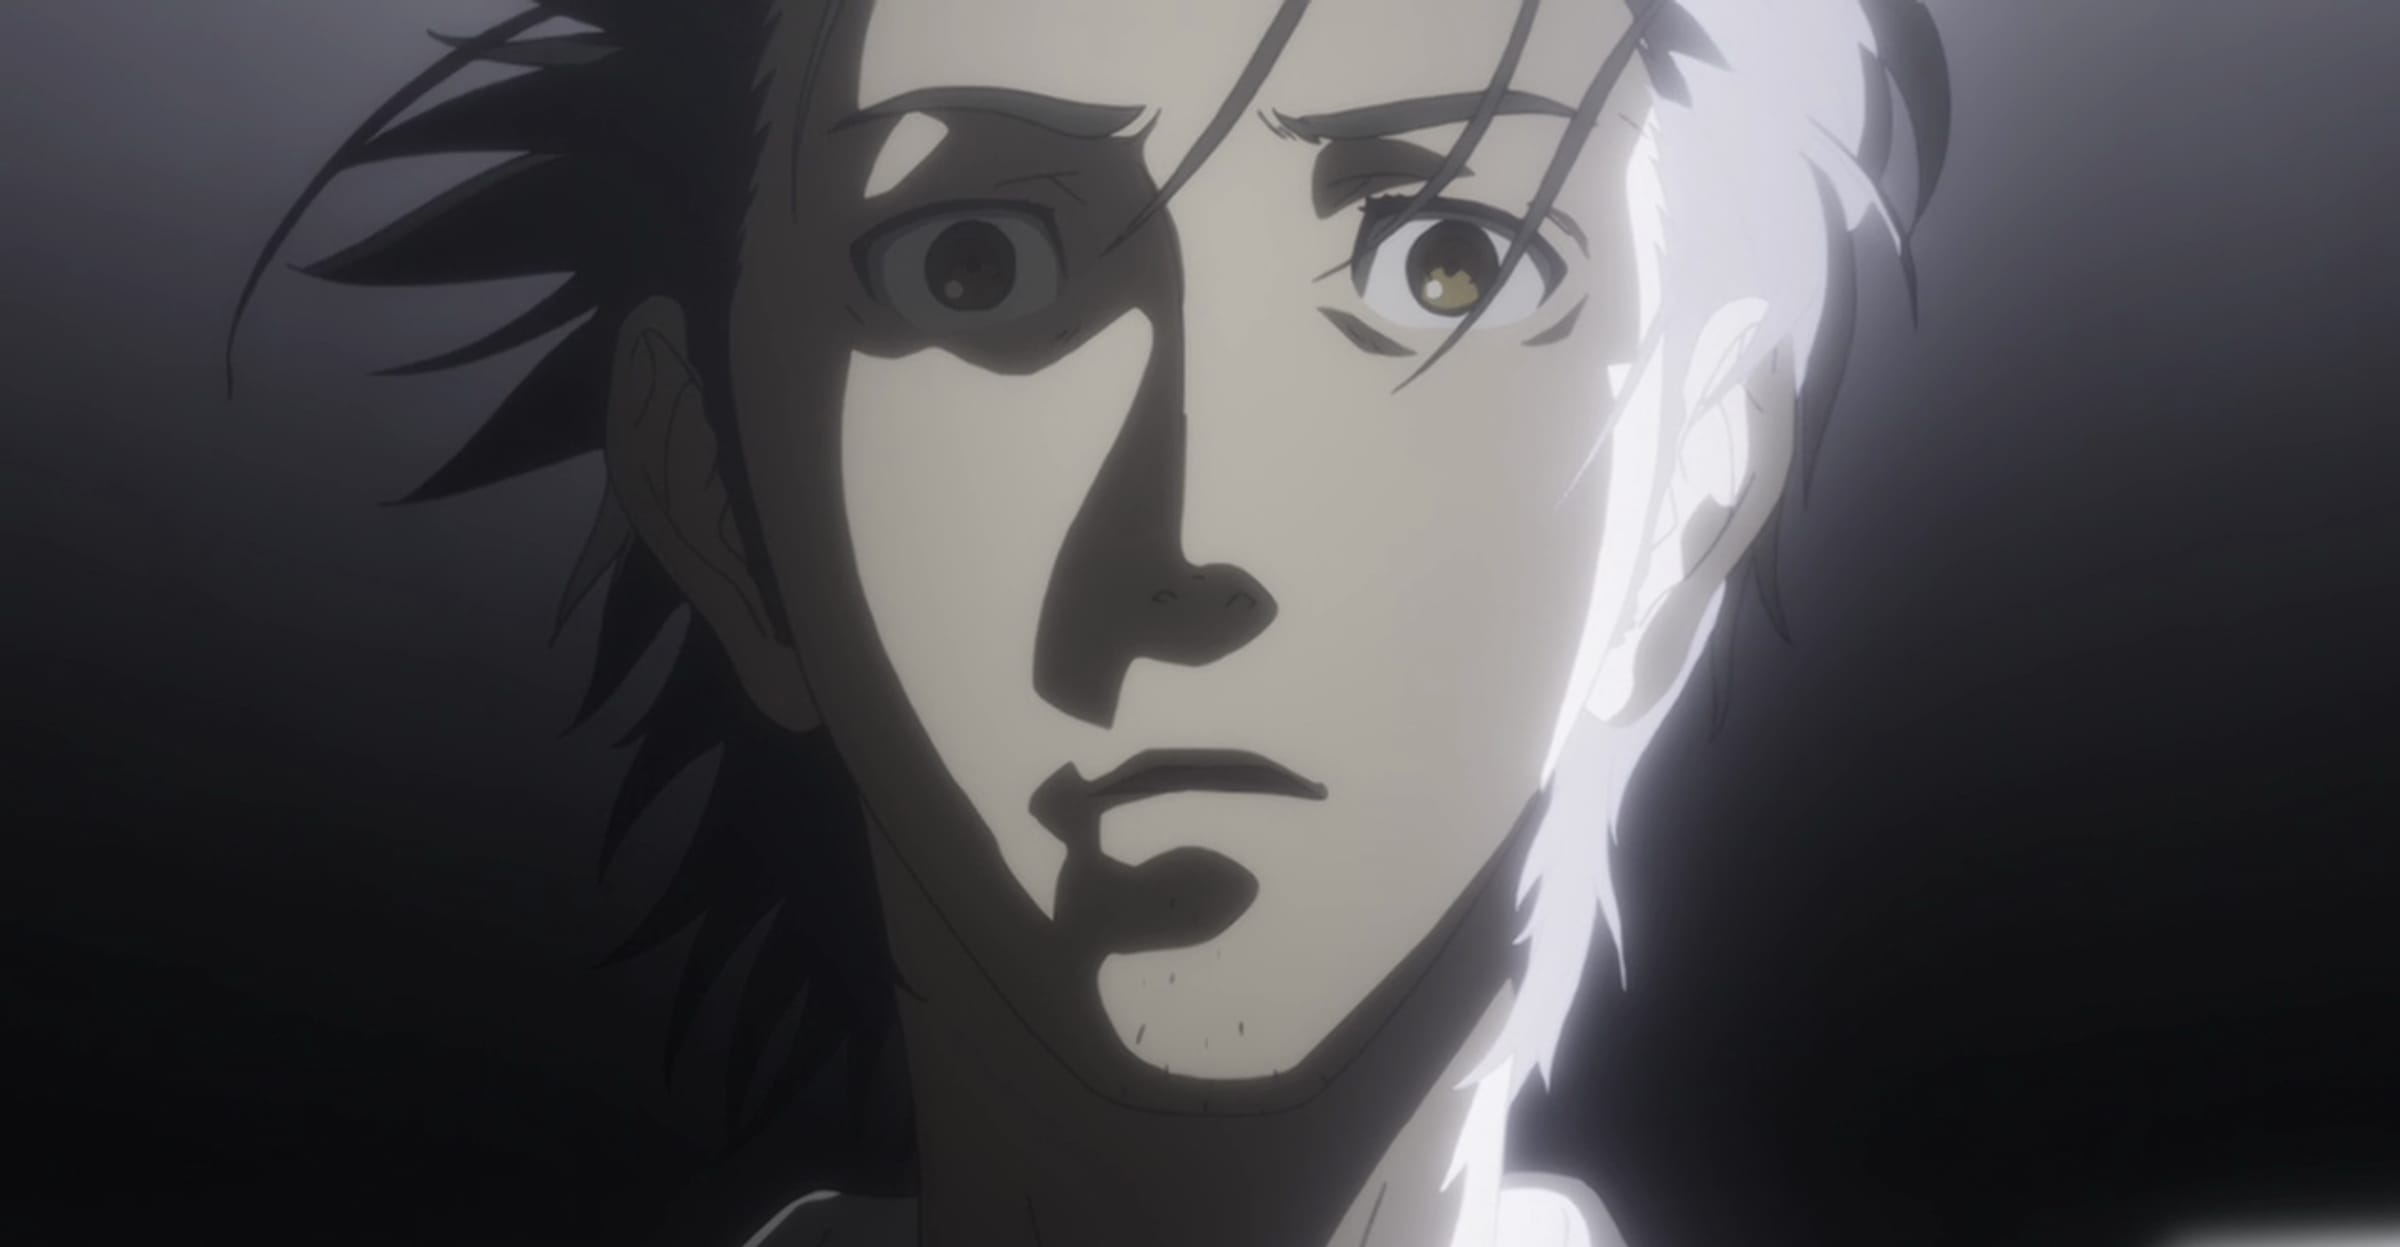 Starting Steinsgate today. Haven't seen the anime yet, but decided